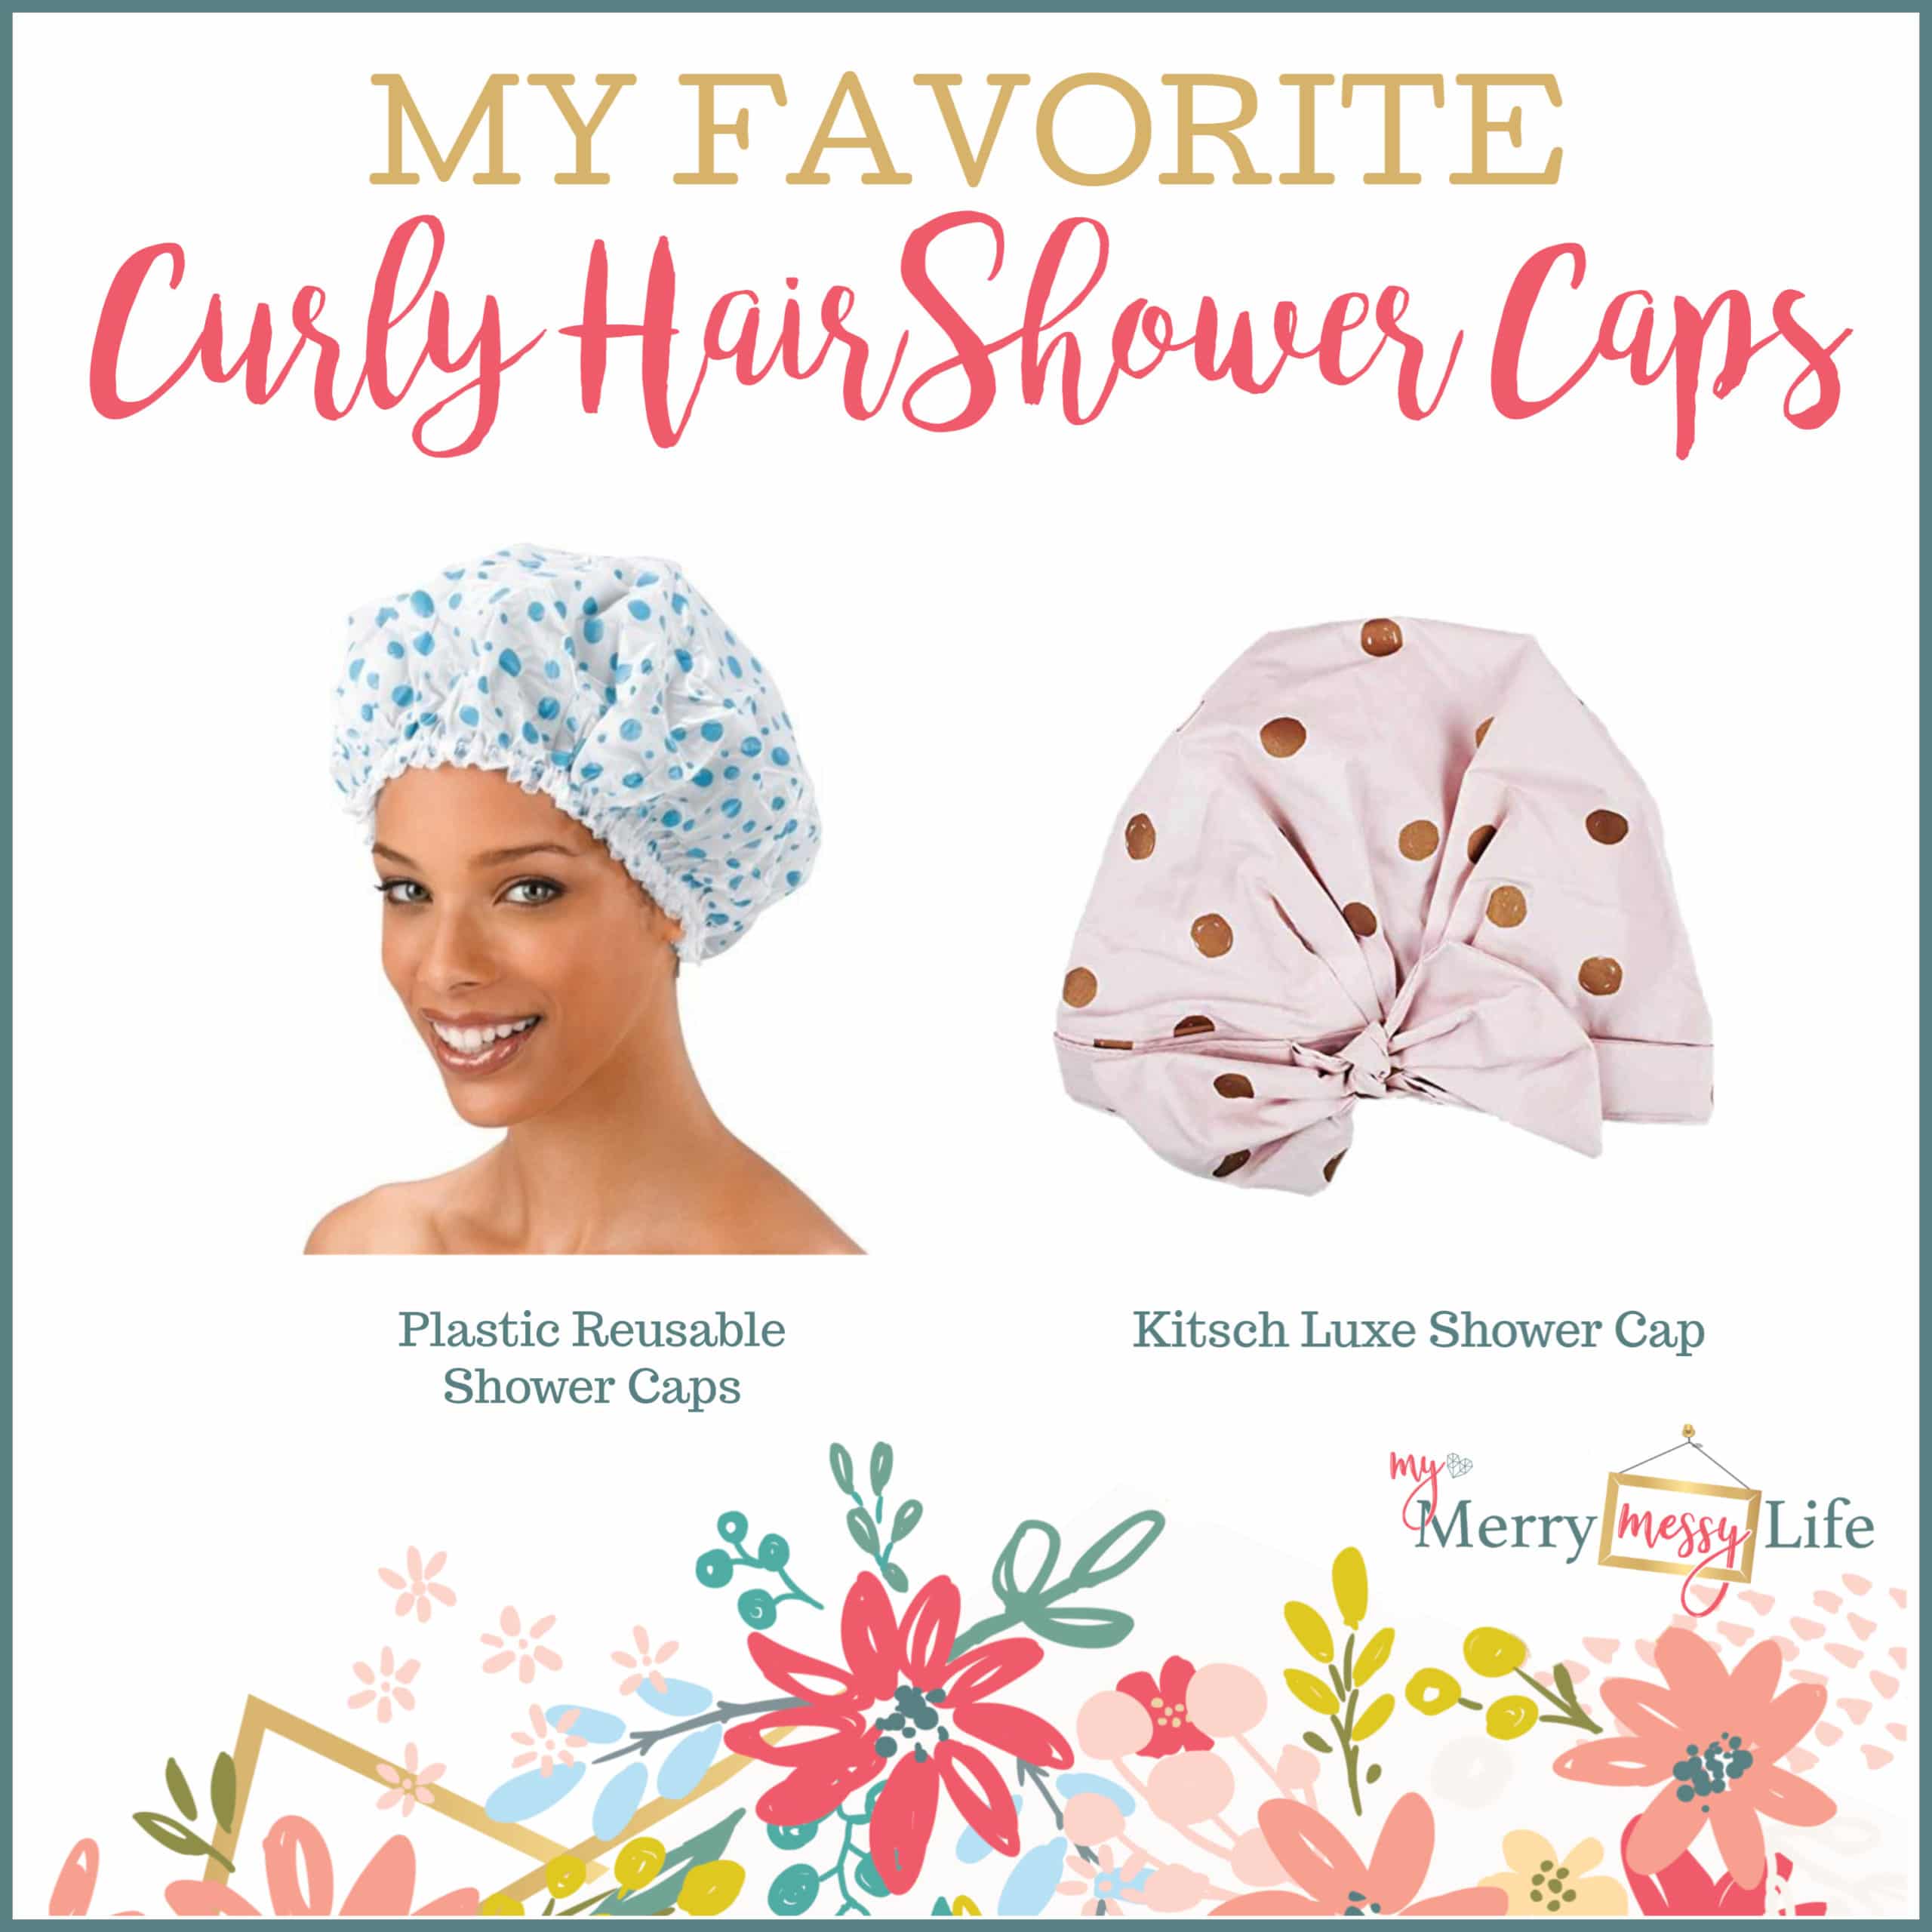 My Favorite Curly Hair Shower Caps to protect Your curls while you shower